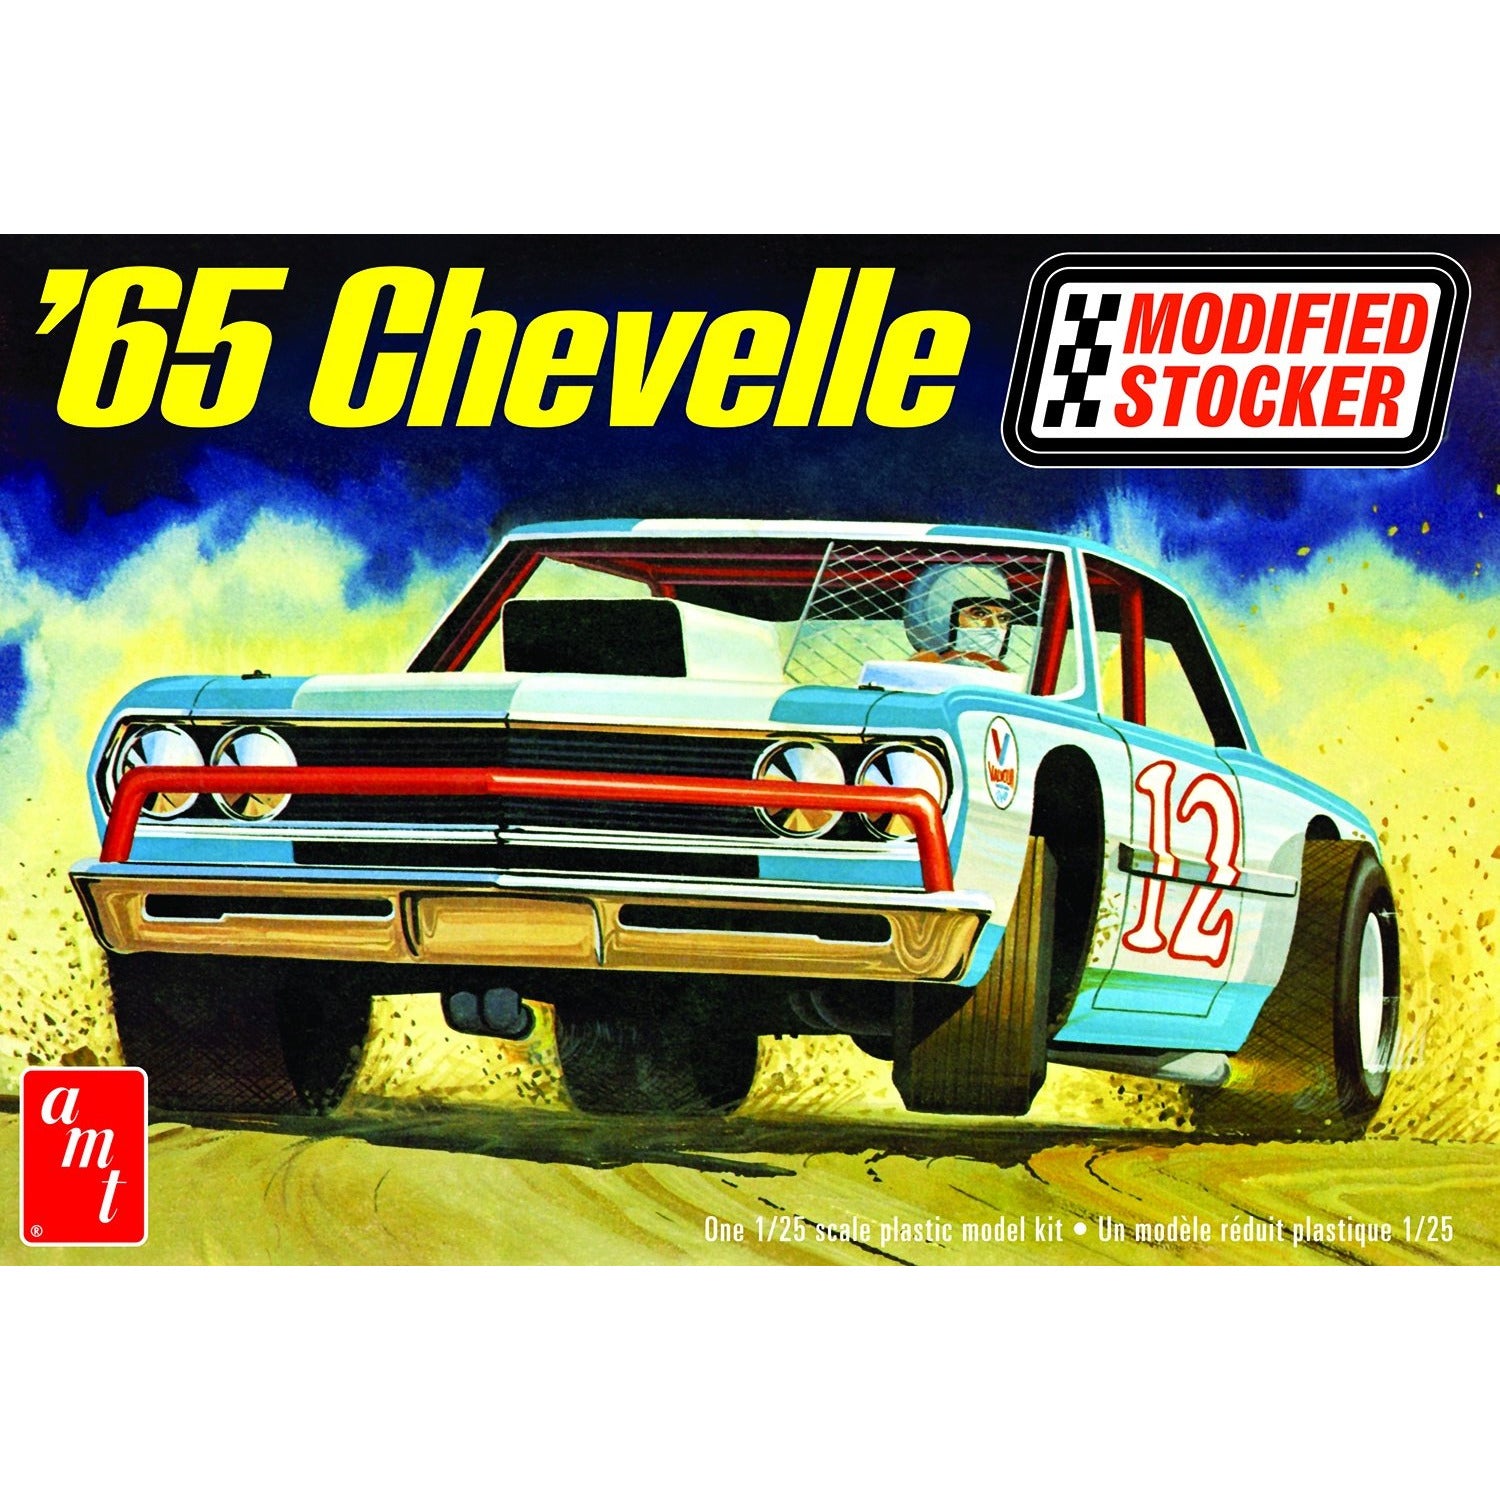 1965 Chevy Chevelle Modified Stocker 1/25 Model Car Kit #1177 by AMT